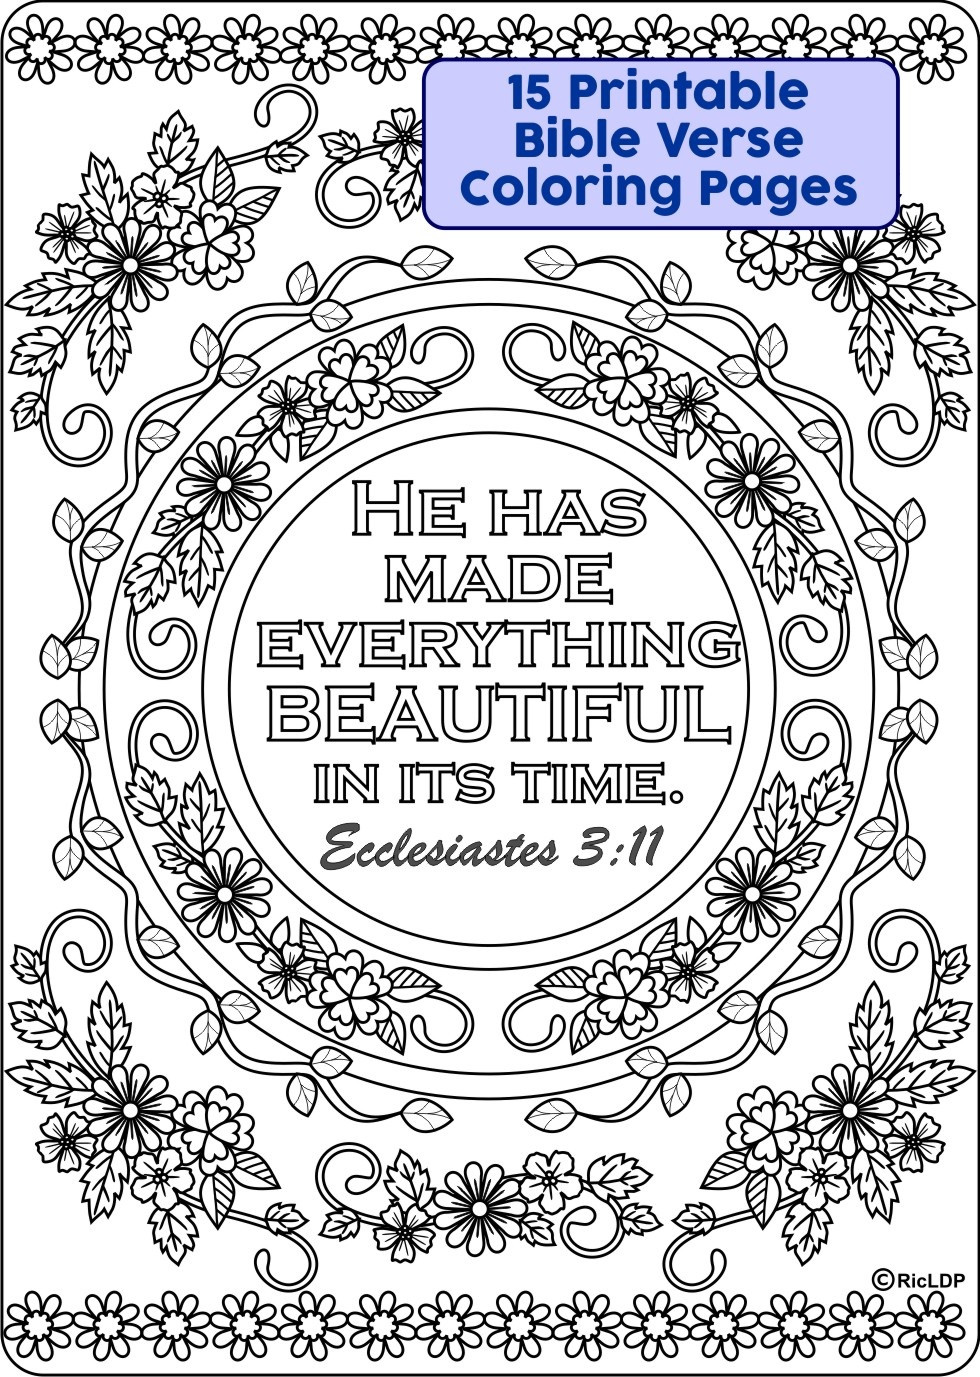 Printable Bible Verse Coloring Pages
 15 Printable Bible Verse Coloring Pages